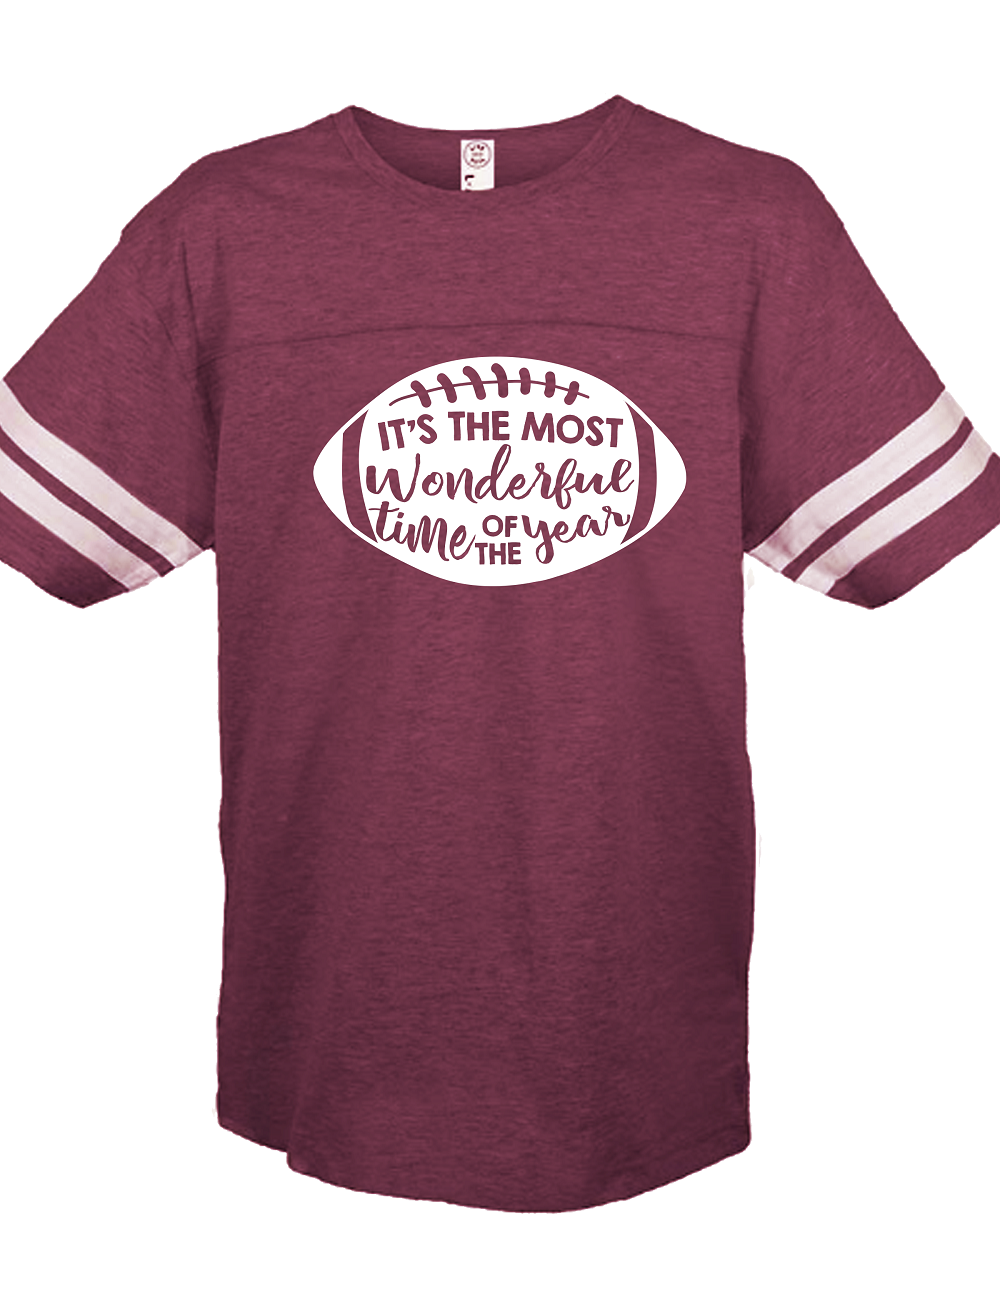 Sassy Frass Most Wonderful Time of the Year Football Season Maroon Vintage Jersey Girlie Bright T Shirt - SimplyCuteTees